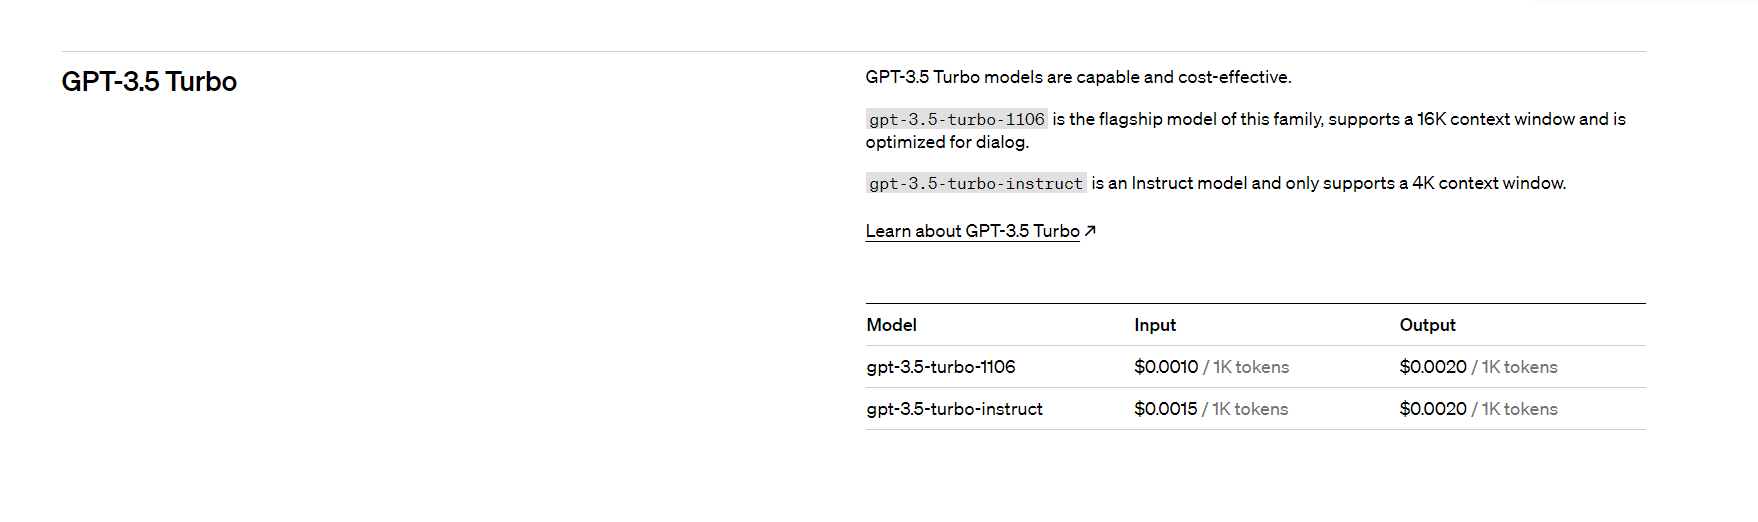 Example of current pricing for GPT-3.5 Turbo